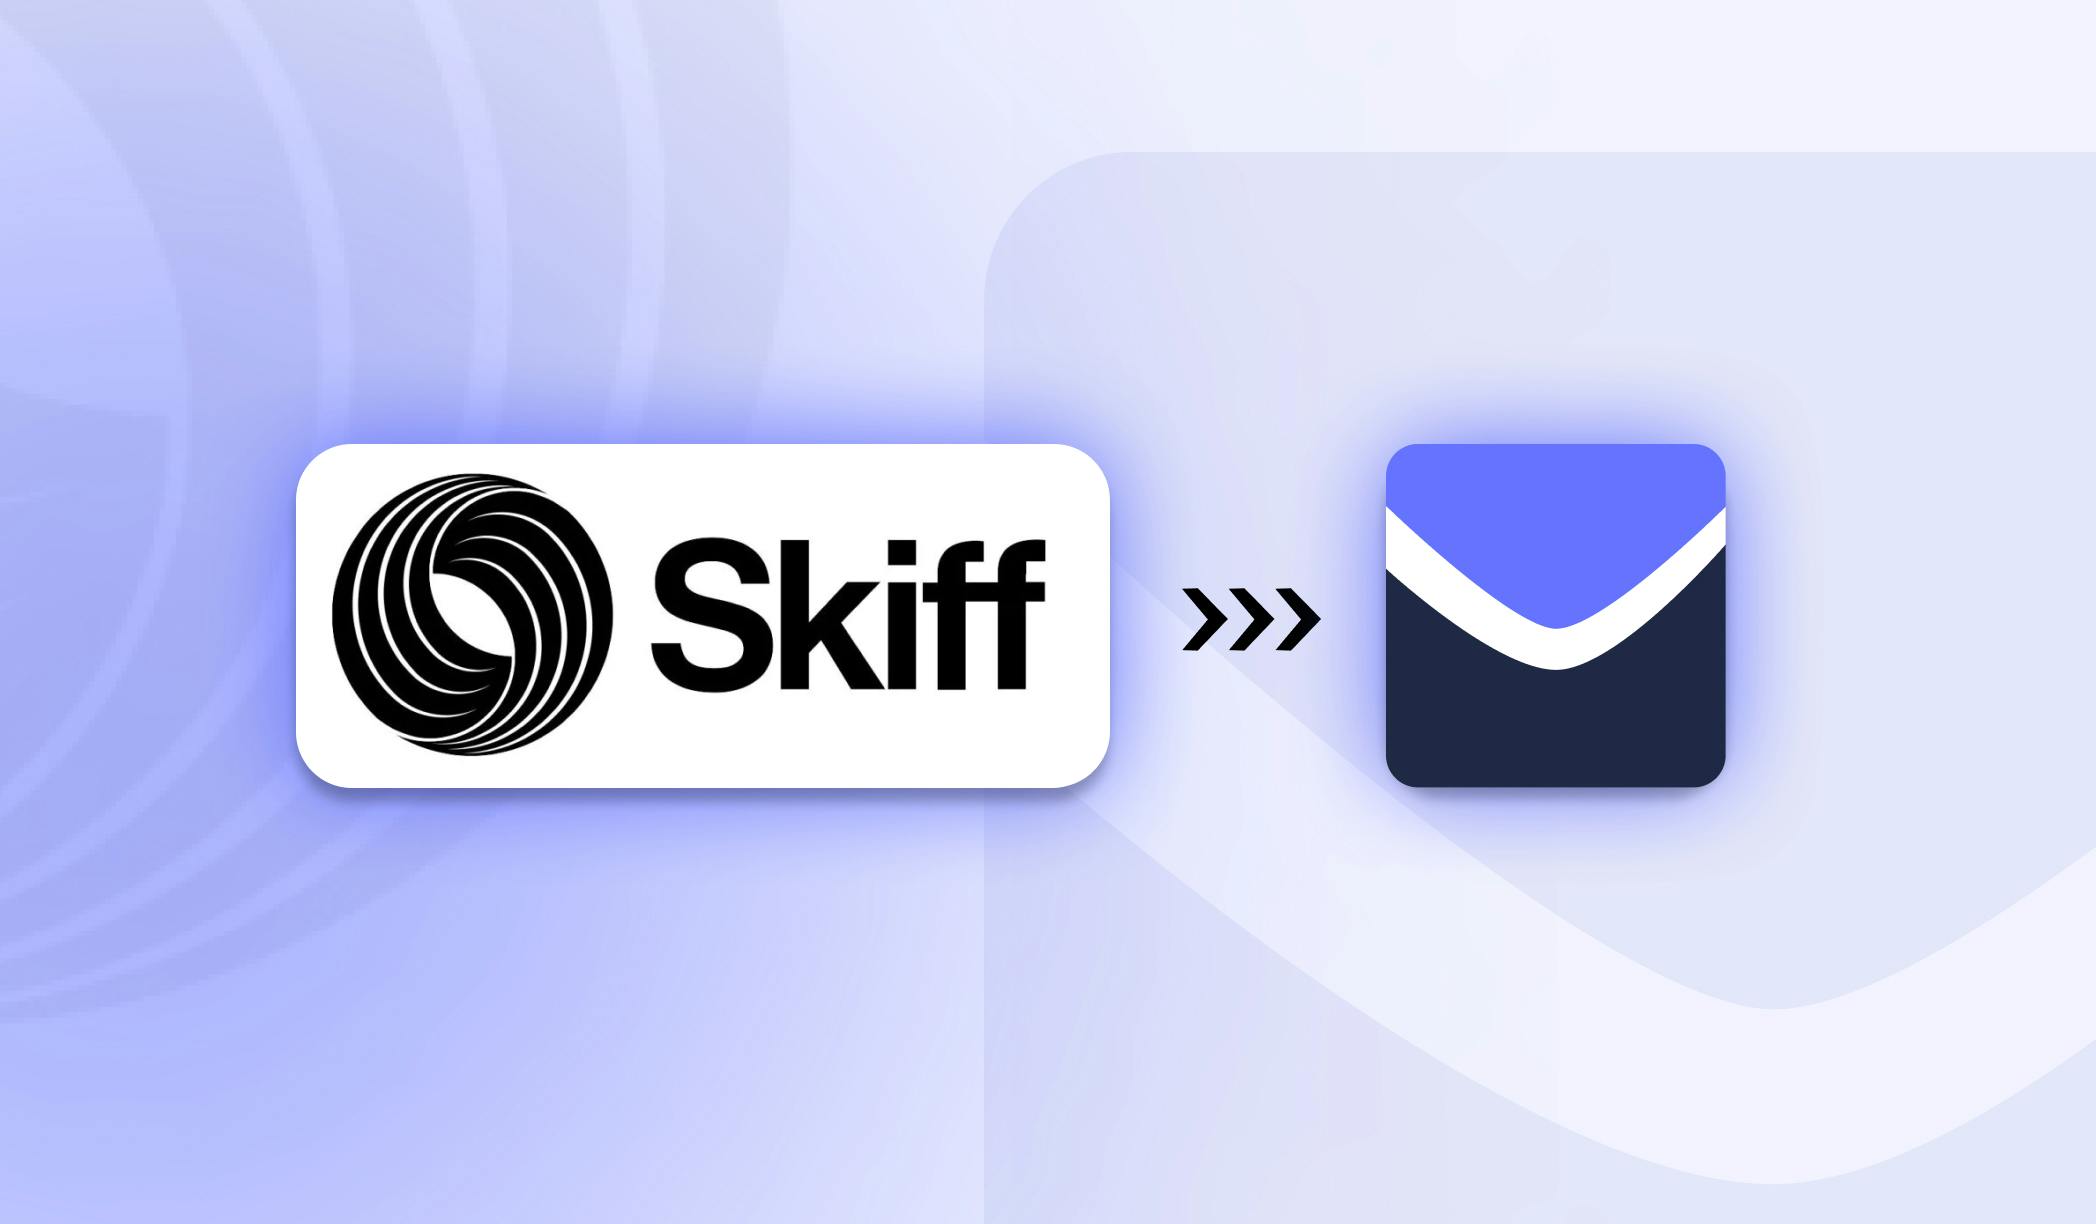 Blogpost image of the Skiff logo pointing to the StartMail logo, inviting Skiff users to migrate to StartMail